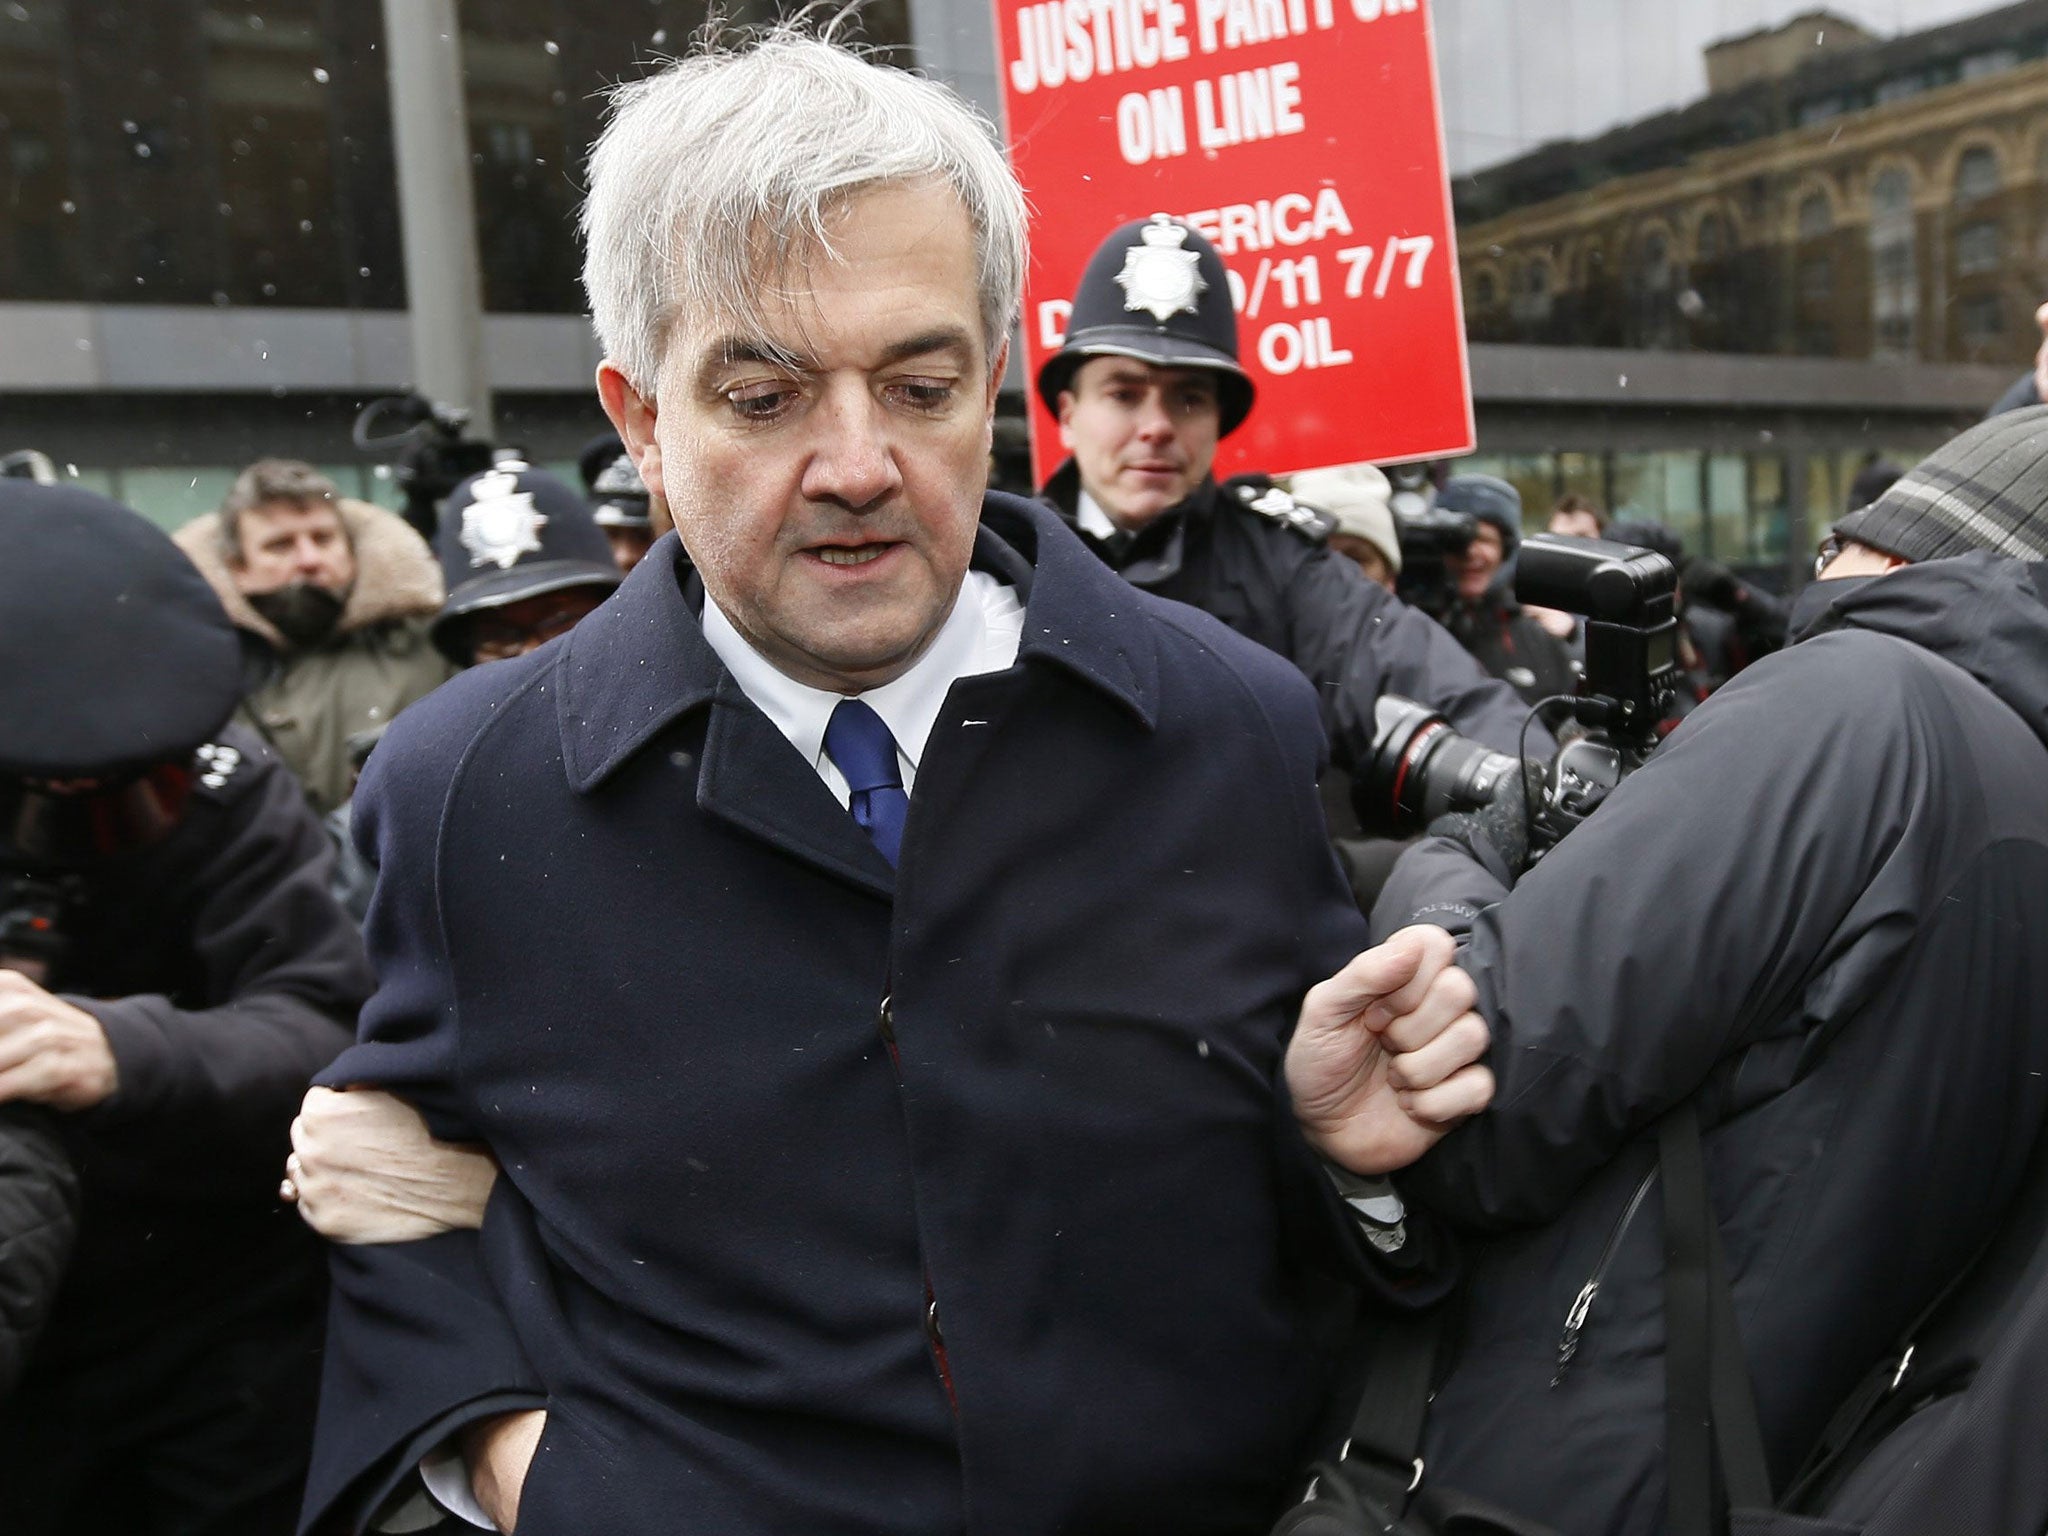 Disgraced former MP Chris Huhne has been hired as the manager of an energy firm just months after being released from prison.